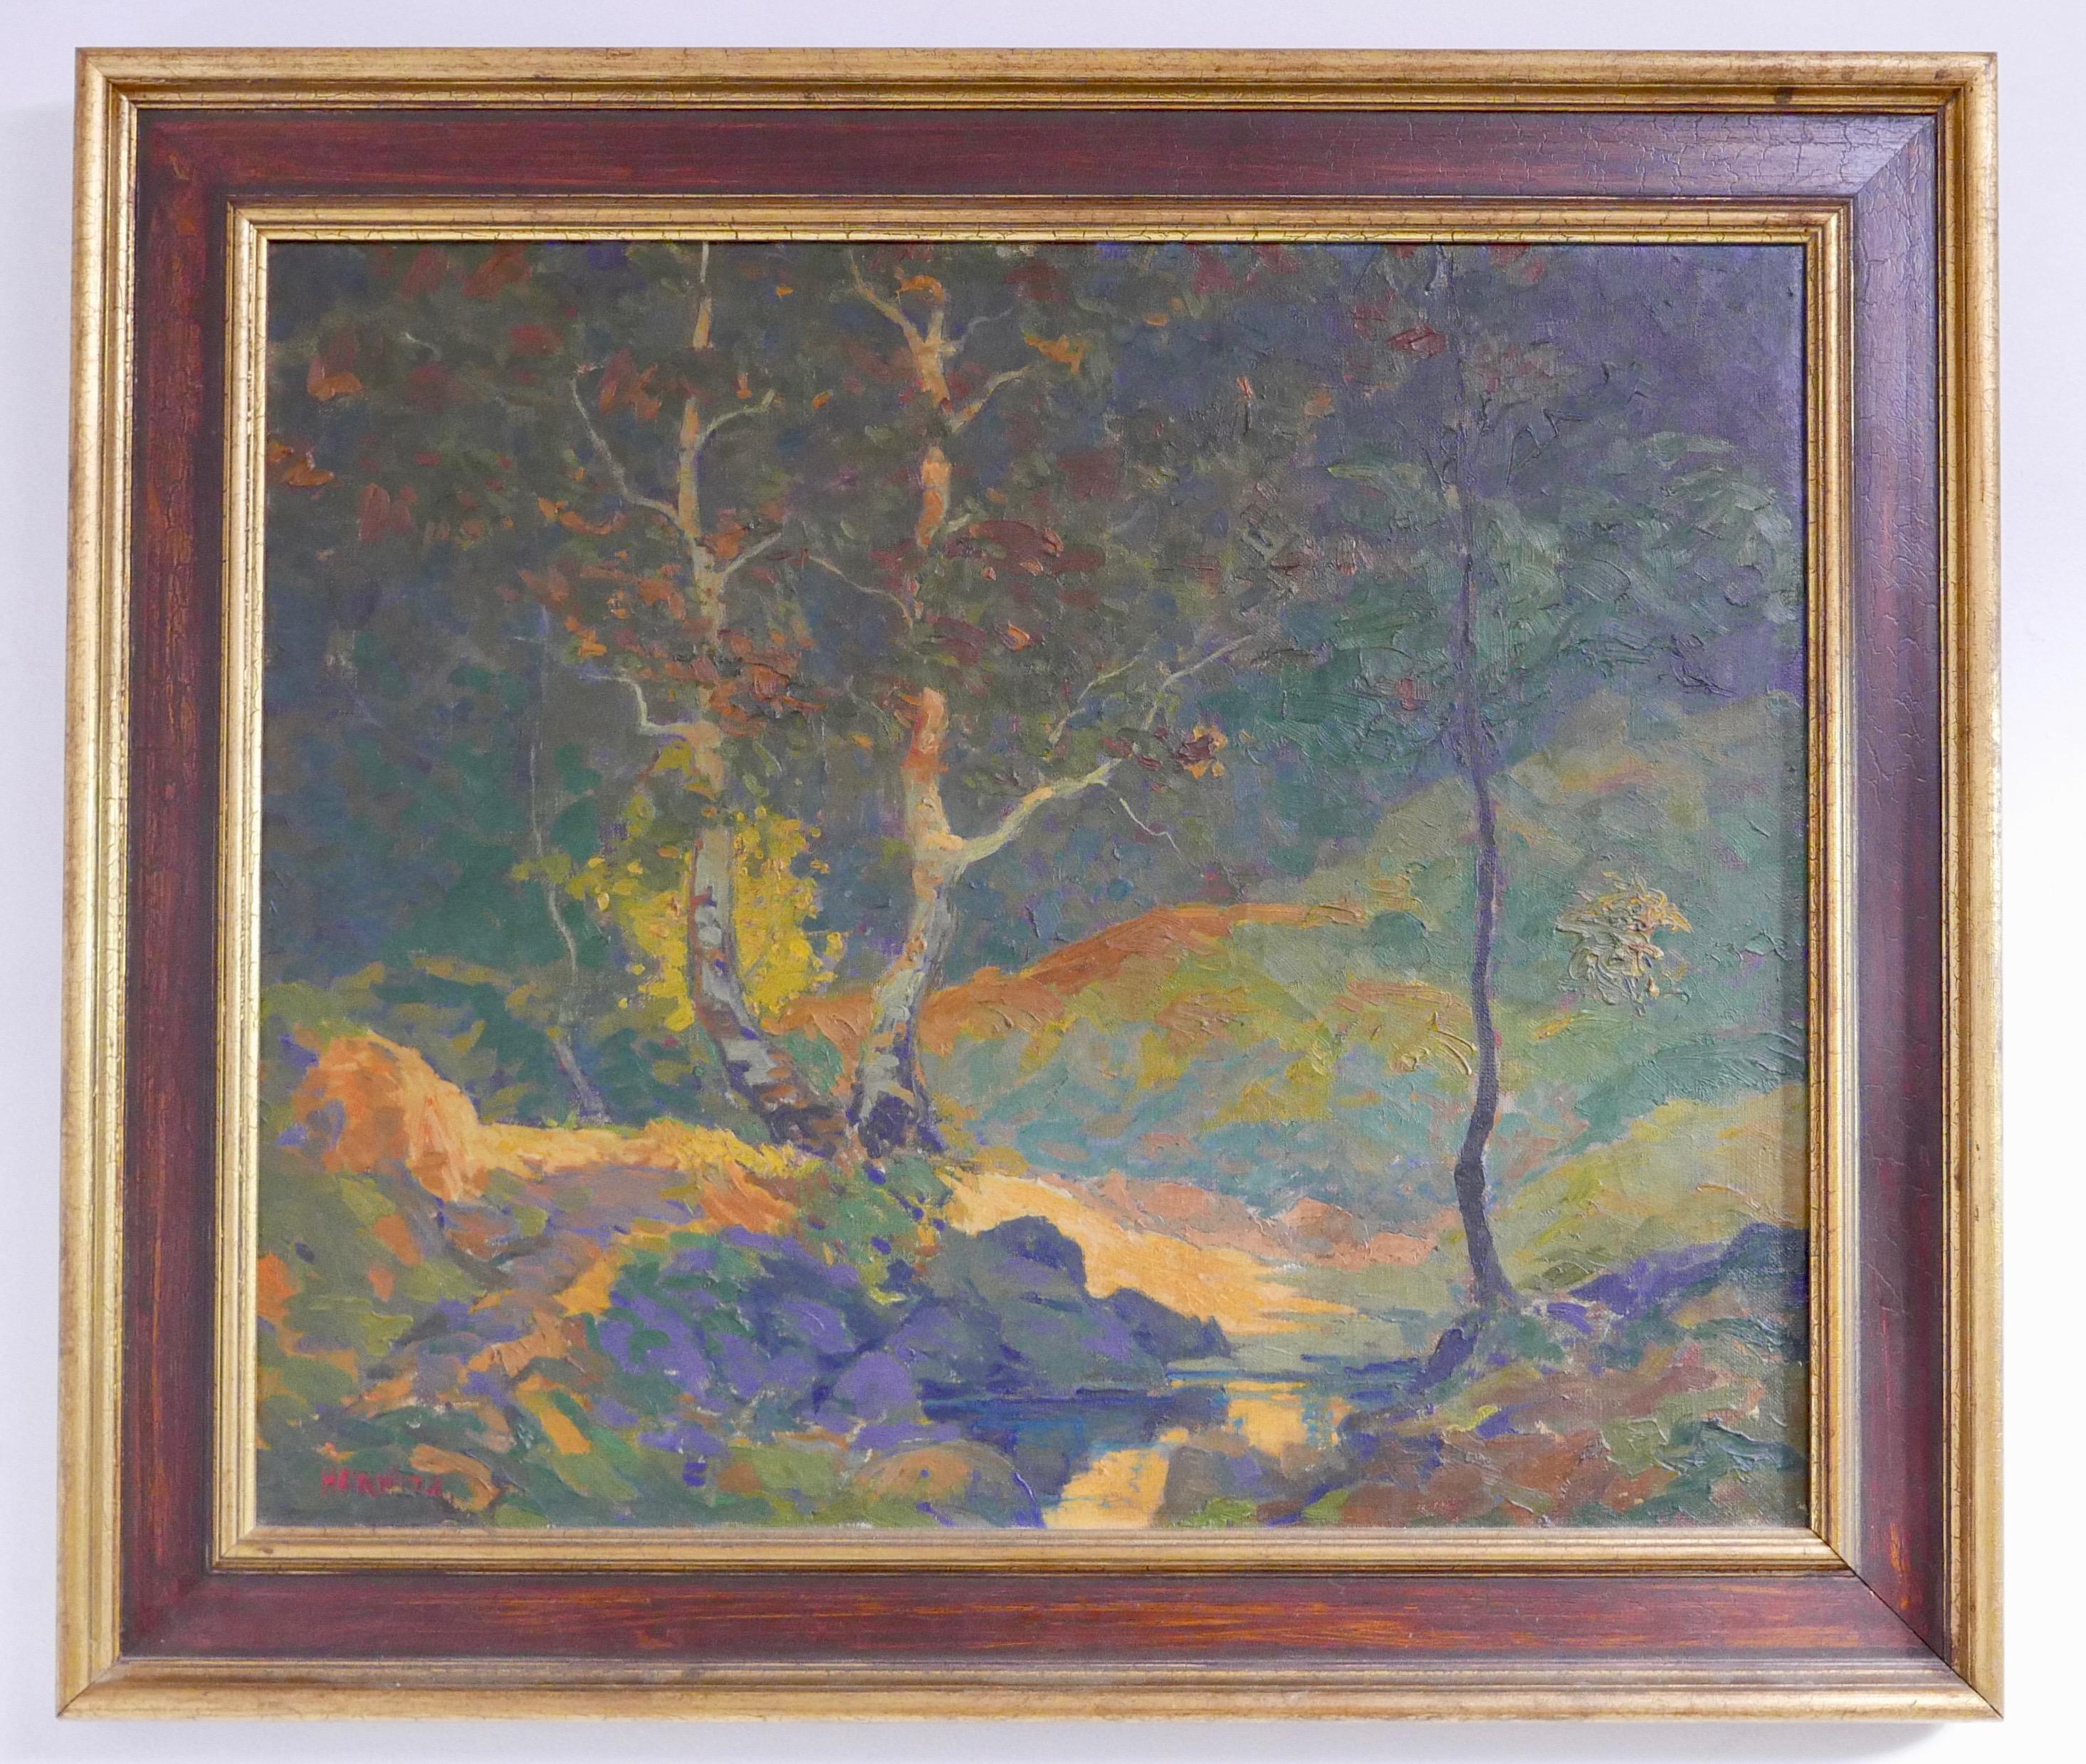 Abstract/ Impressionist Landscape by Russian/American William N. Horwitz, c 1924 3